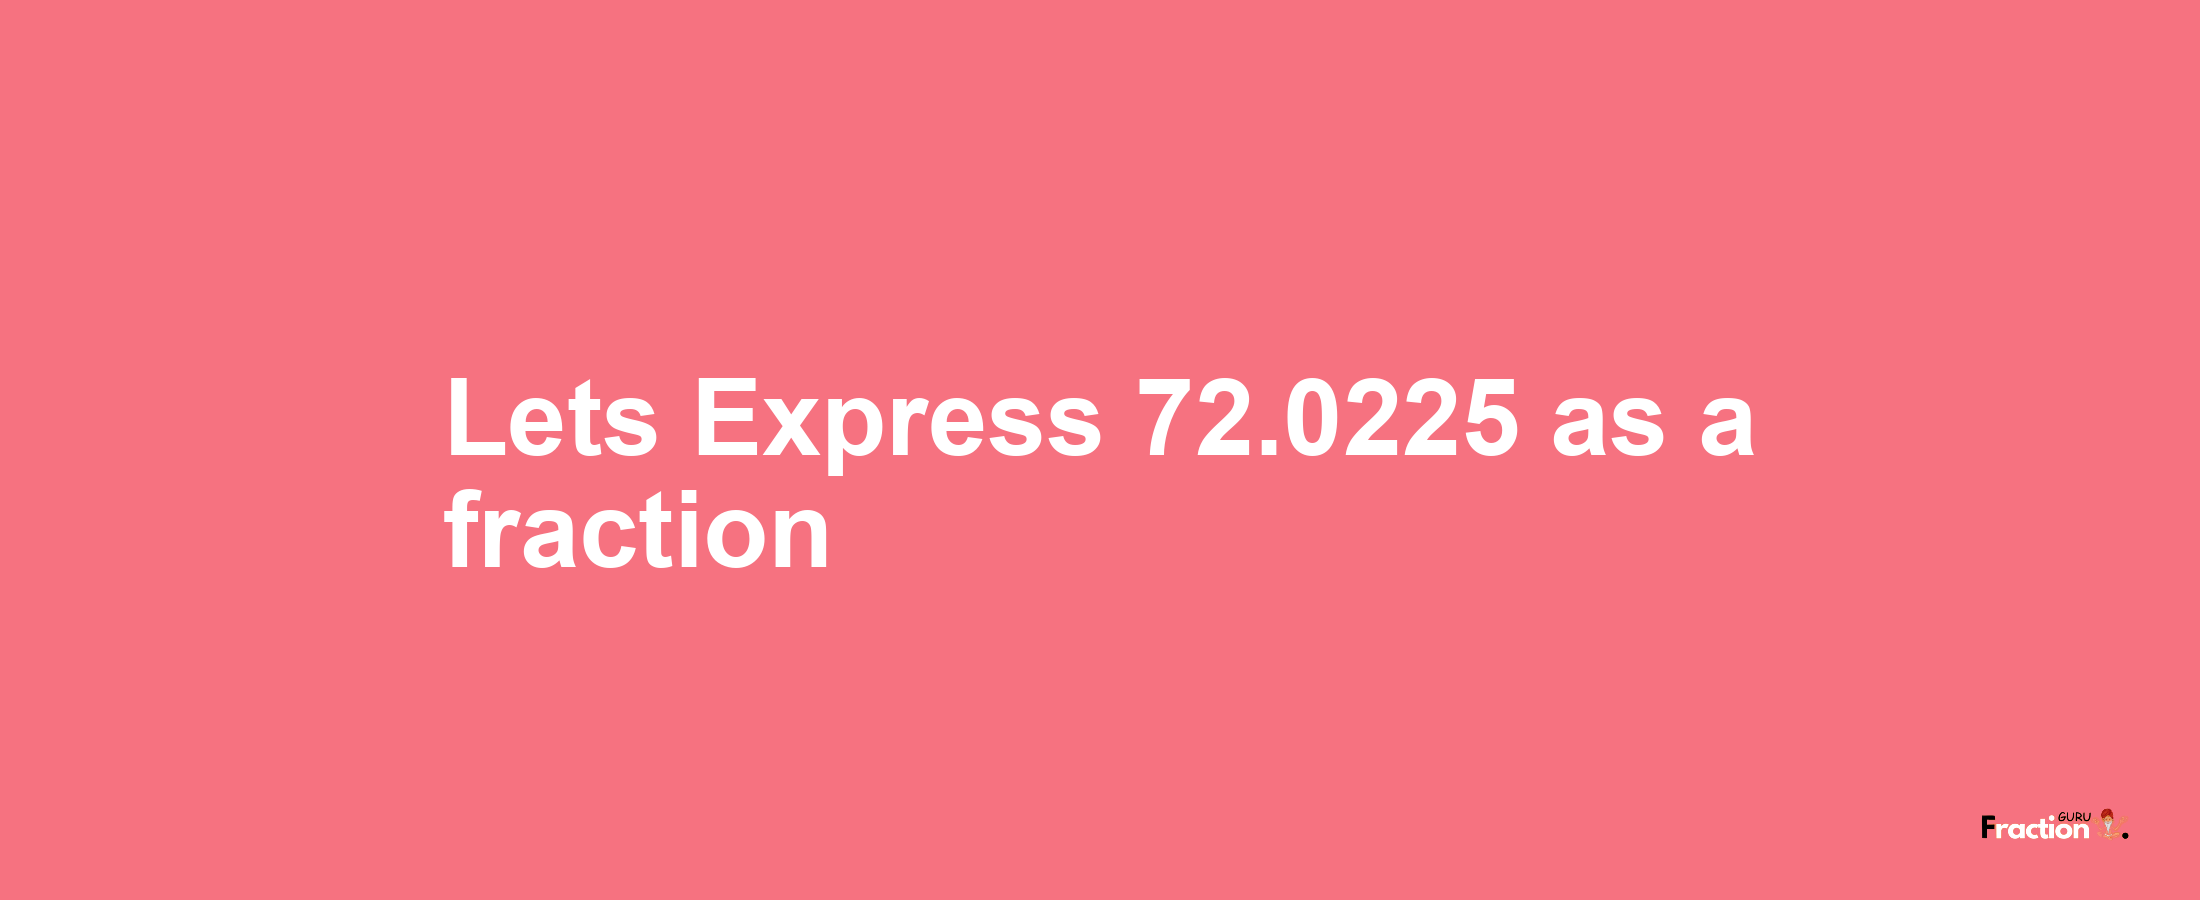 Lets Express 72.0225 as afraction